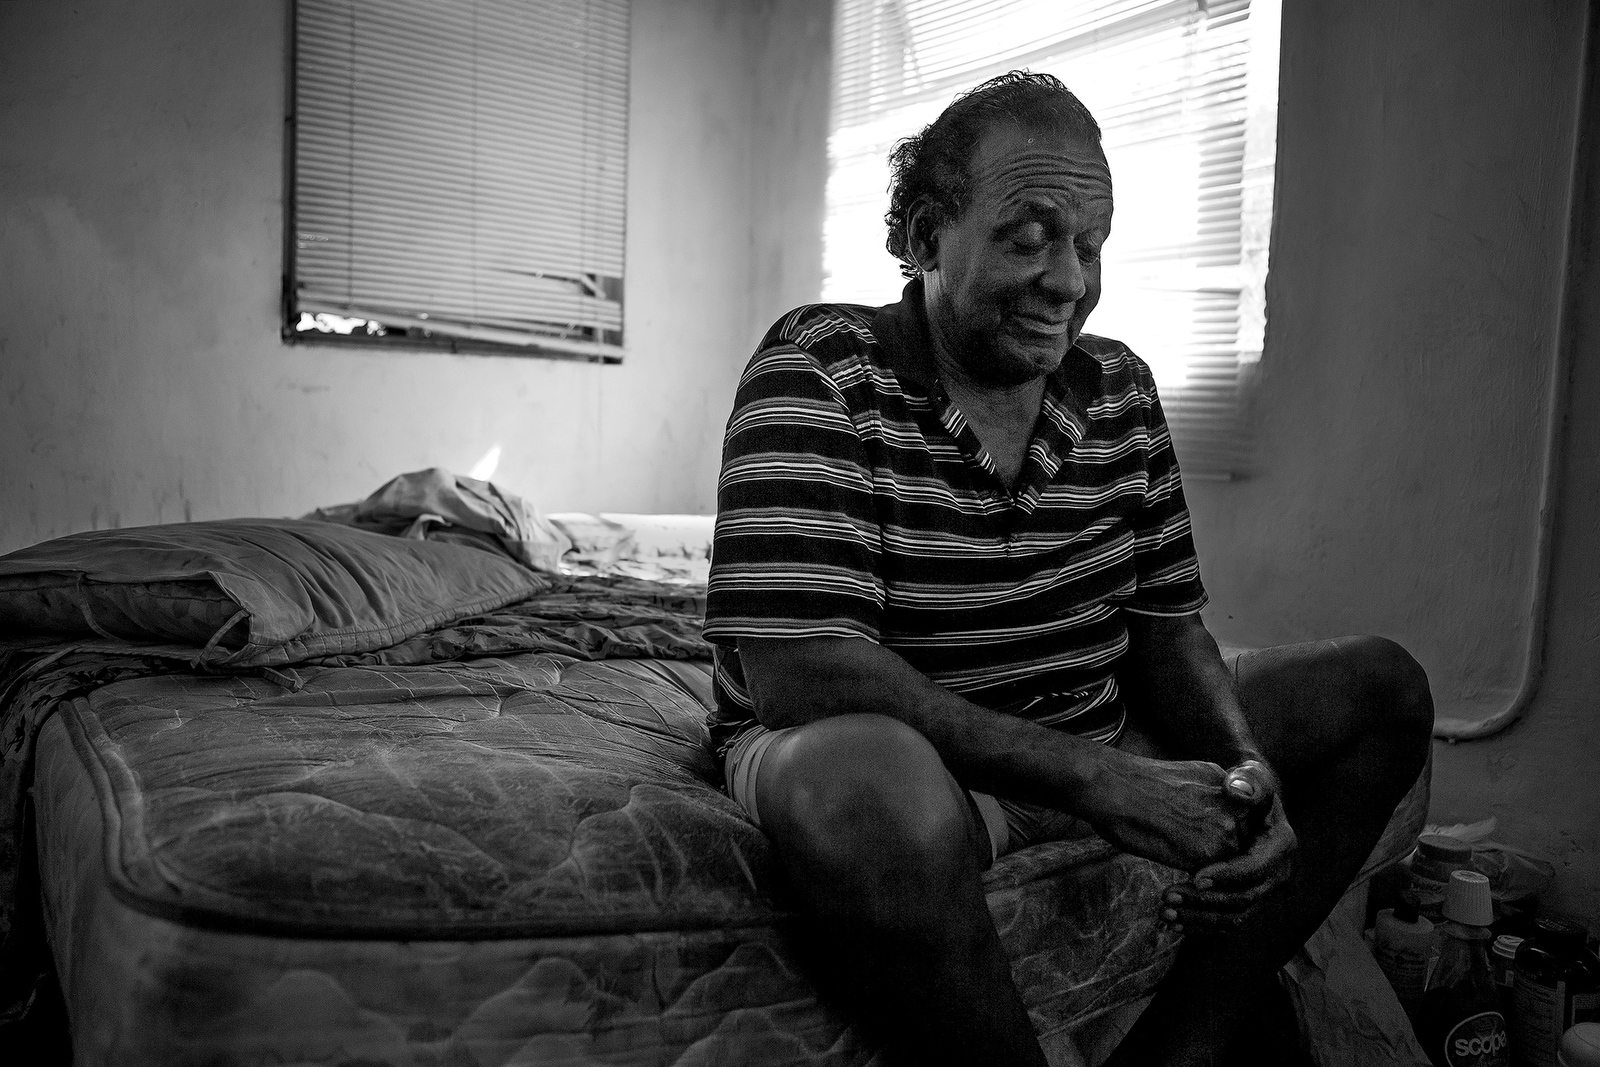  Inman Maloney Jr., 70, sits on his bed in the house he shares with his 91-year-old mother Catherine. Inman and one of his brother have disabilities so Catherine continues to care for them in the house where she raised 10 sons. 